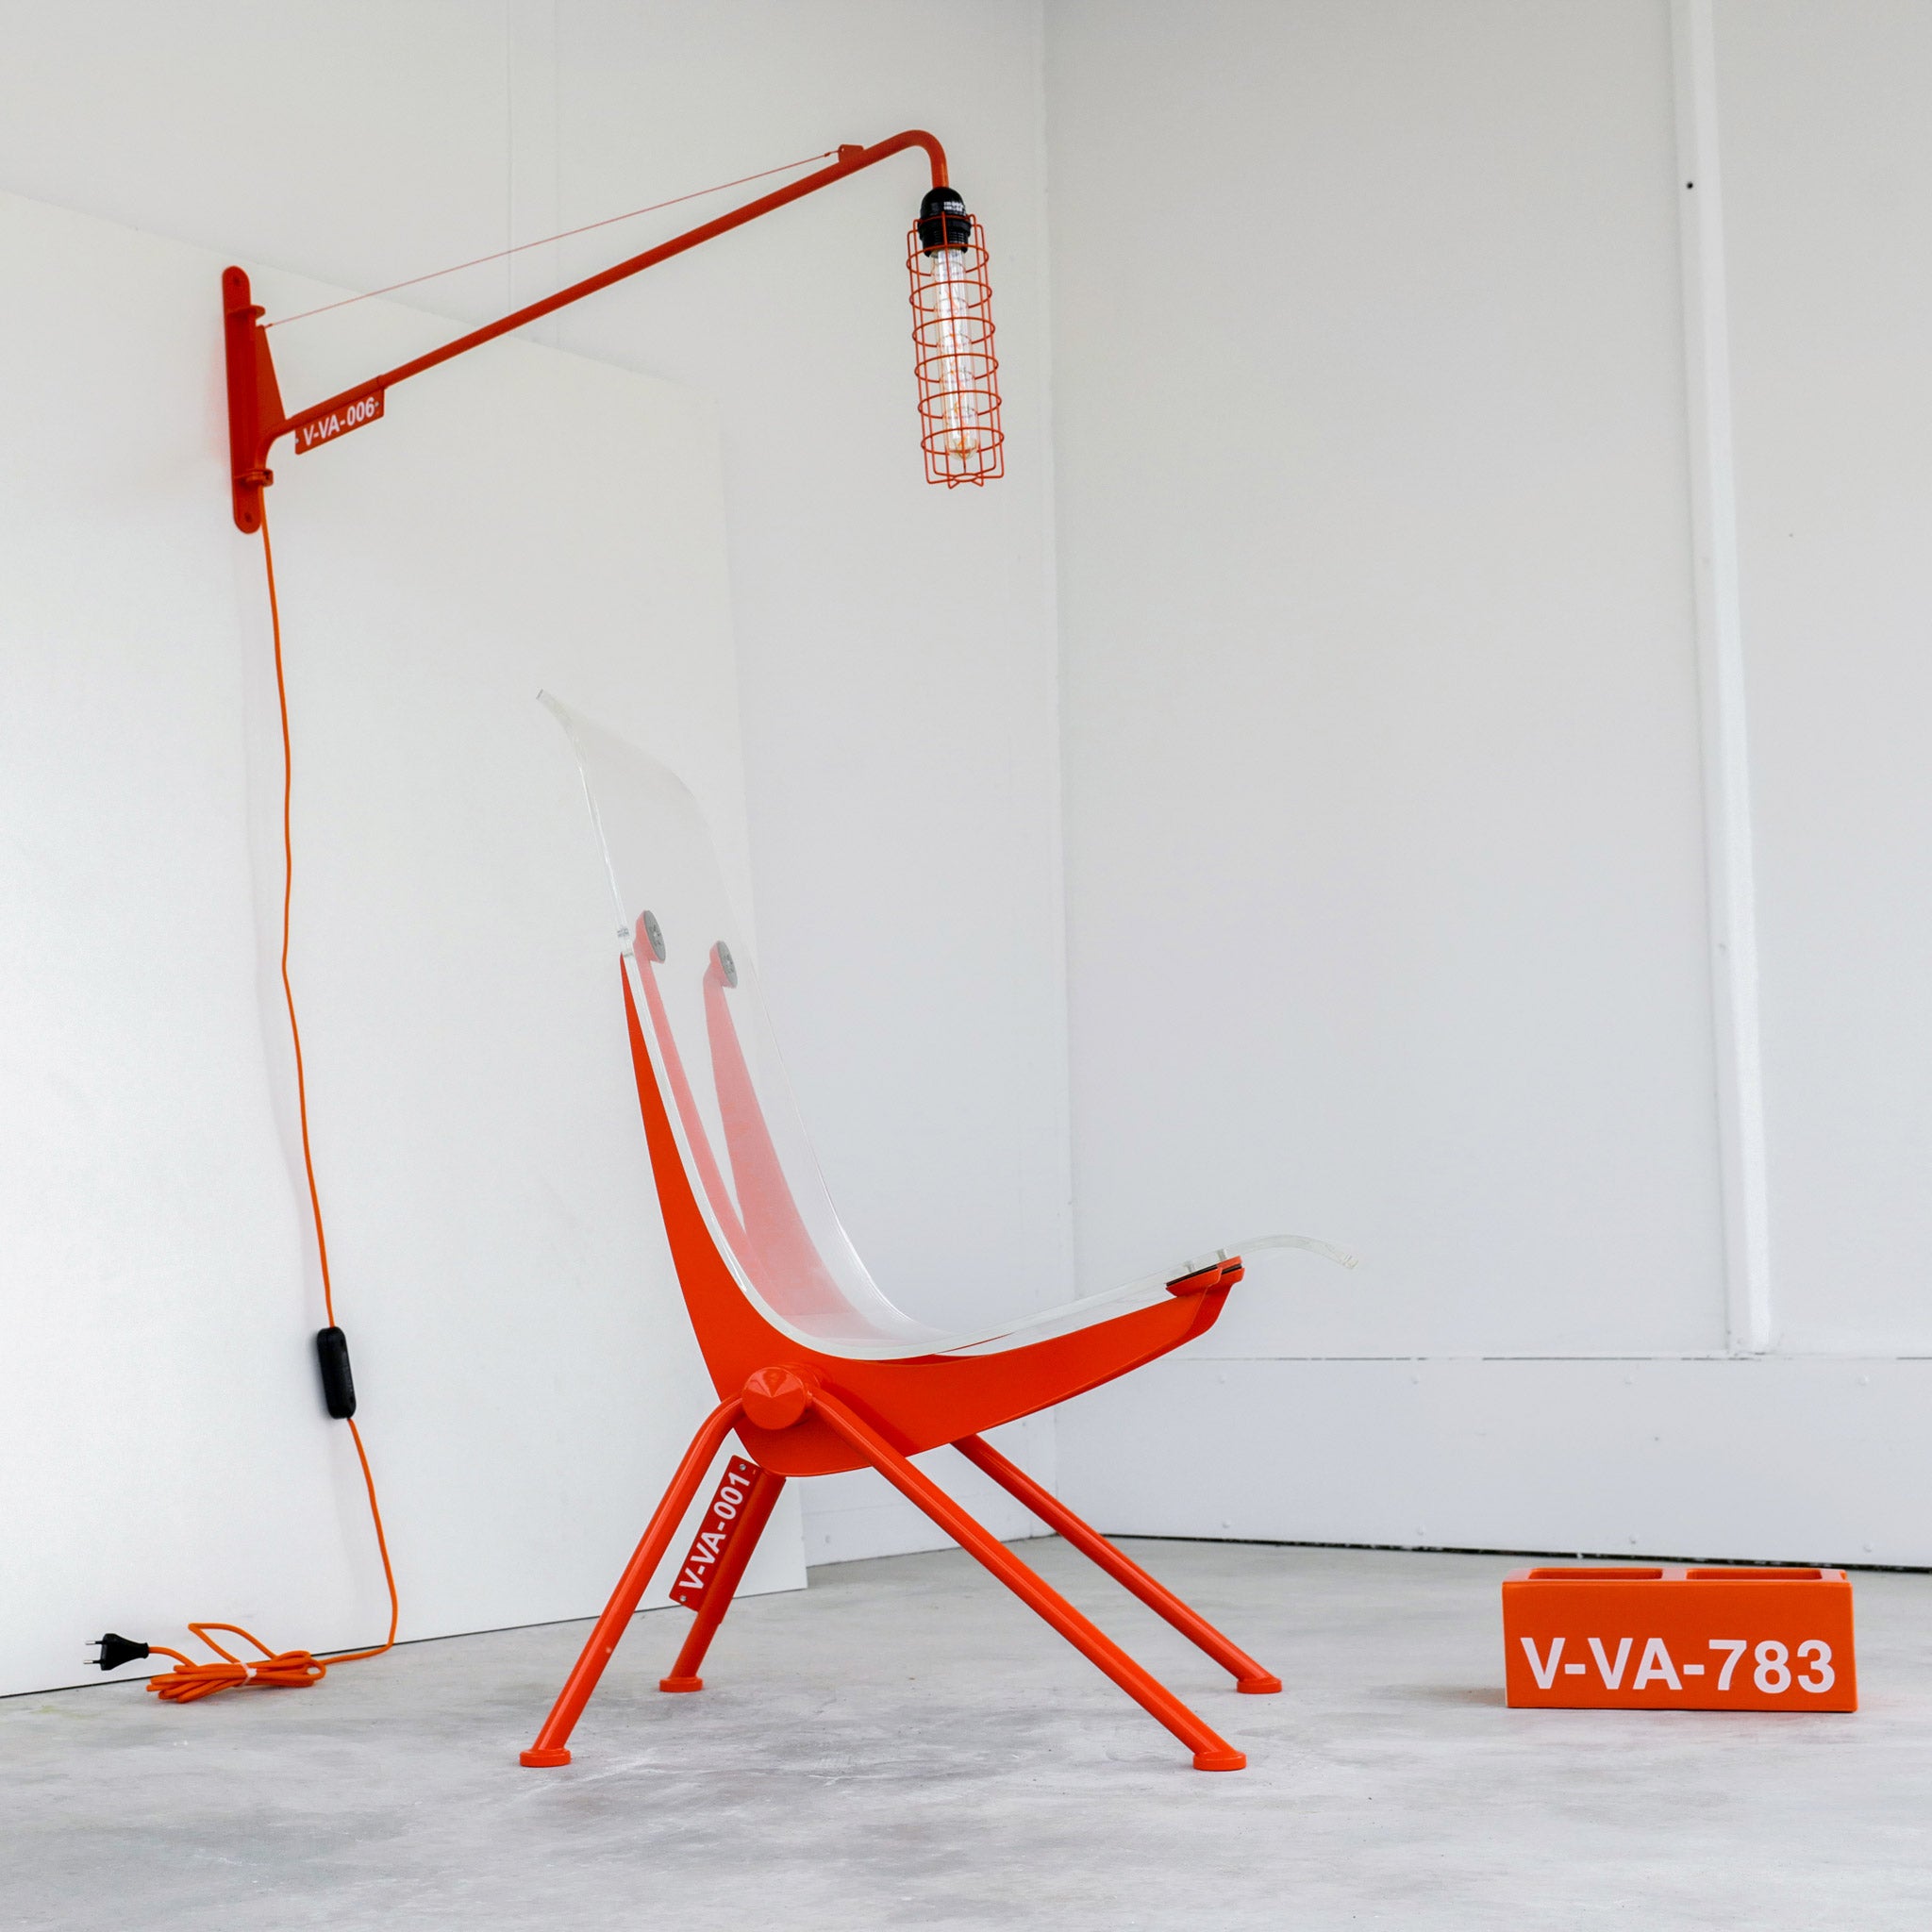 the virgil abloh c/o VITRA collection explores the urgent need for  inclusivity in design